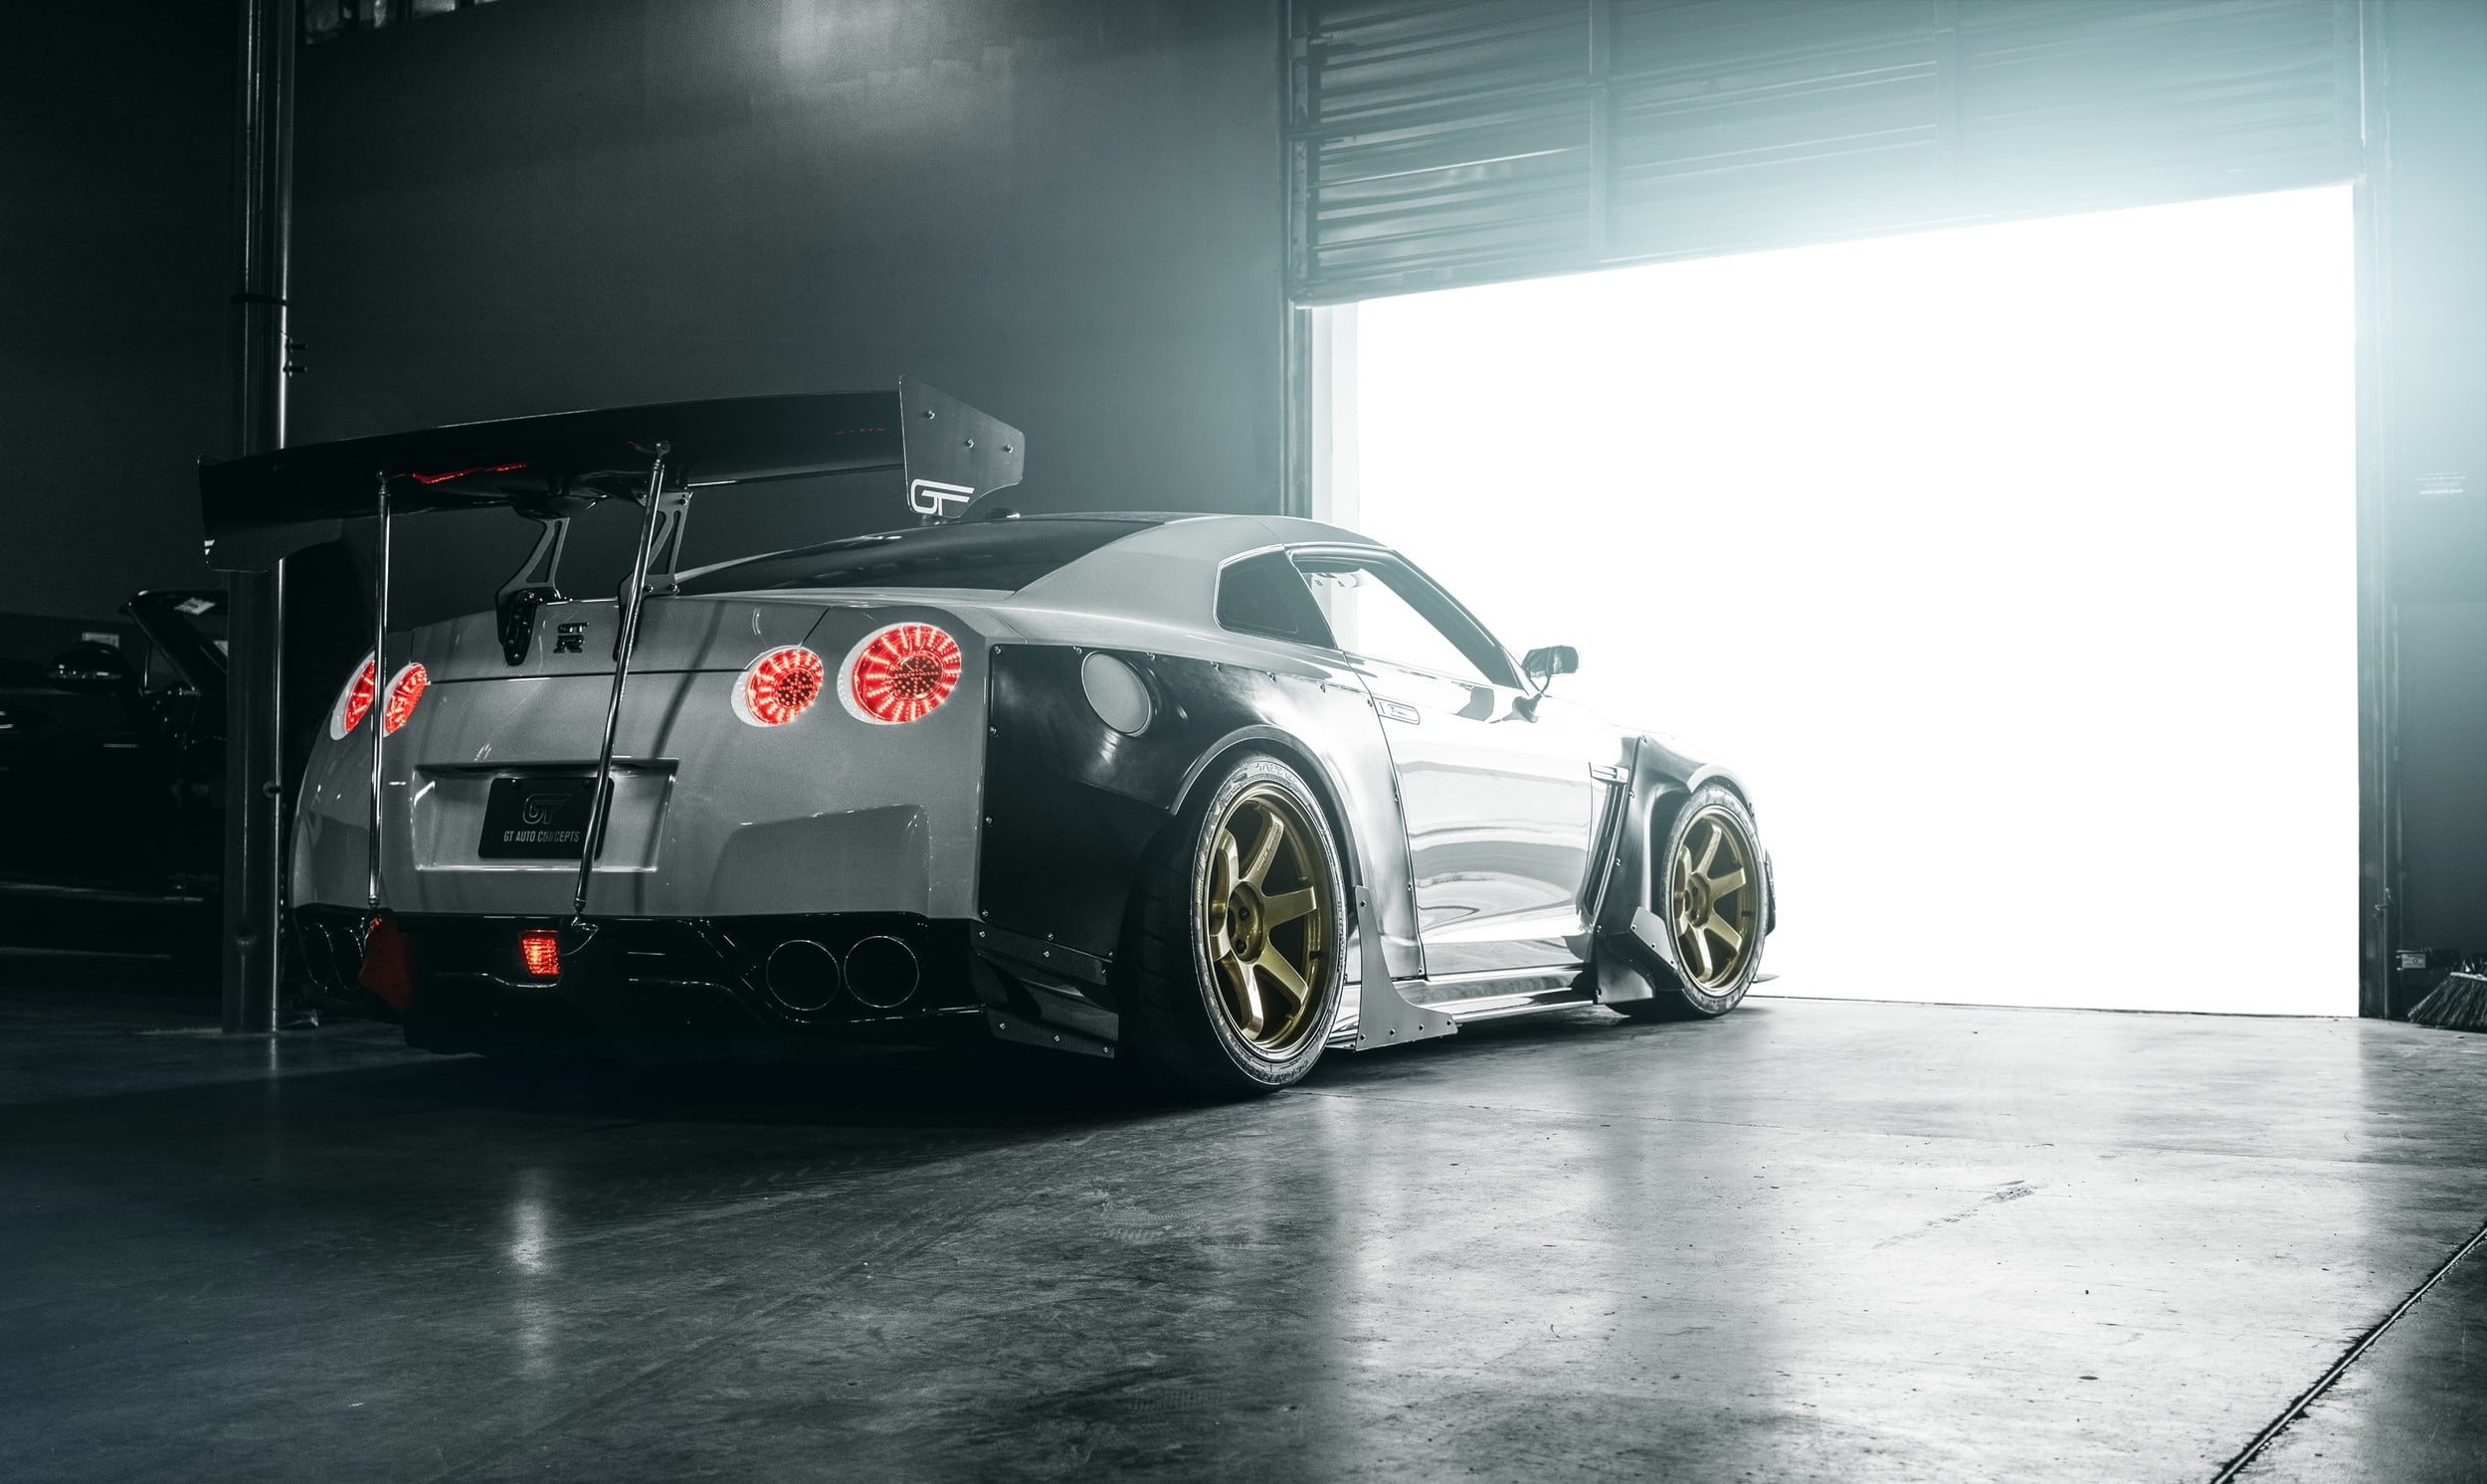 Nissan GT-R R35, Black and white contrast, Coupe elegance, Powerful performance, 2500x1500 HD Desktop